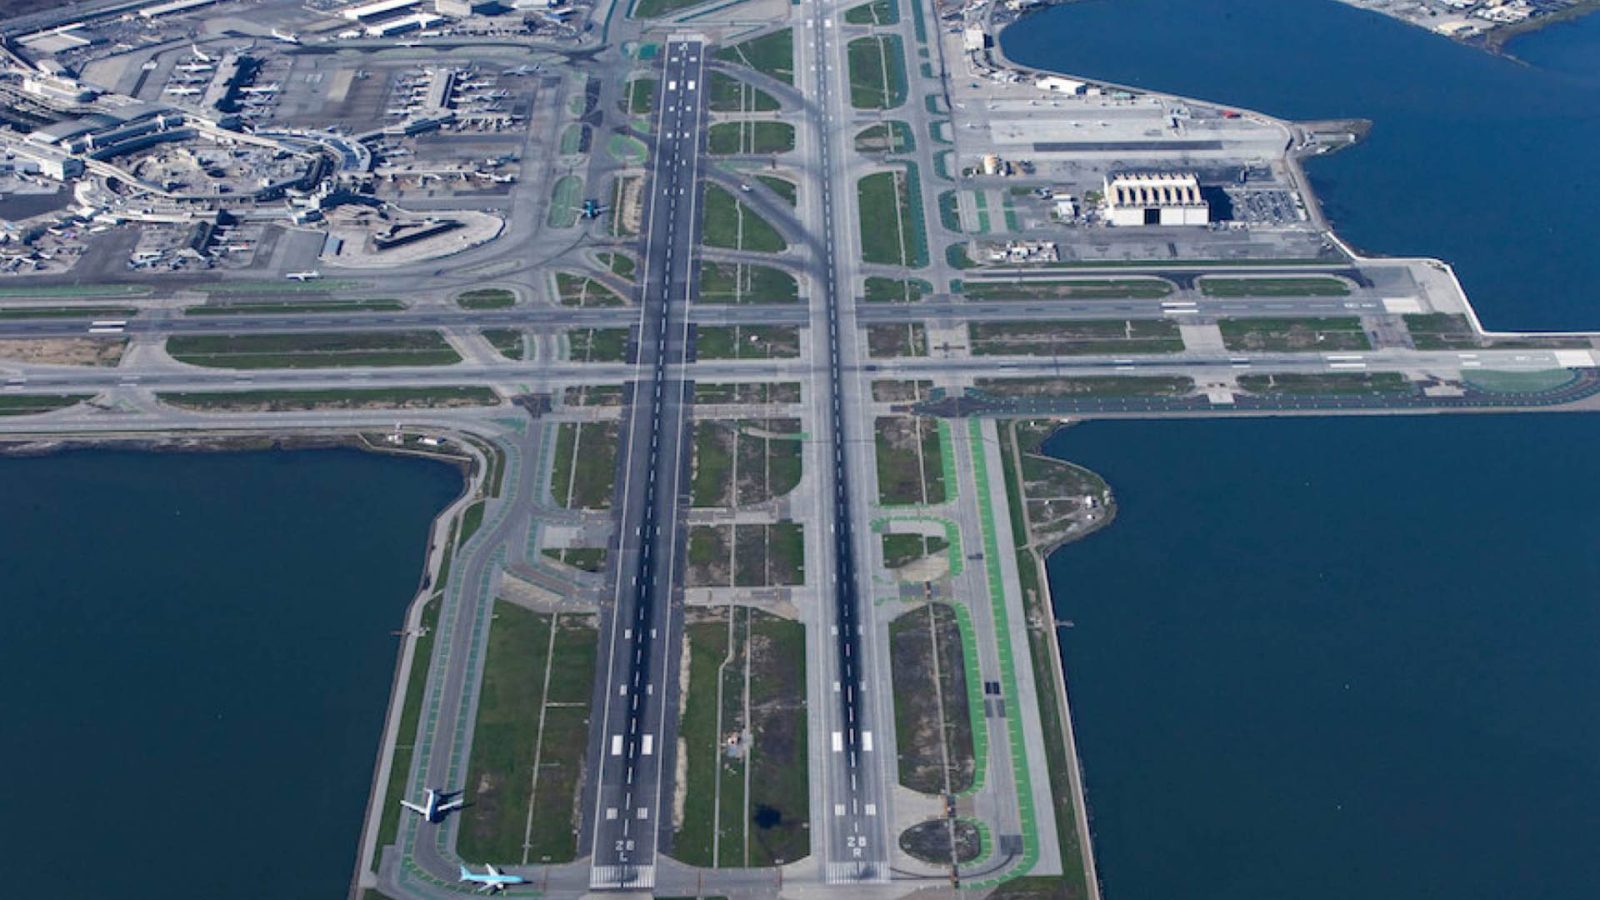 Small drone found on tarmac of San Francisco International Airport